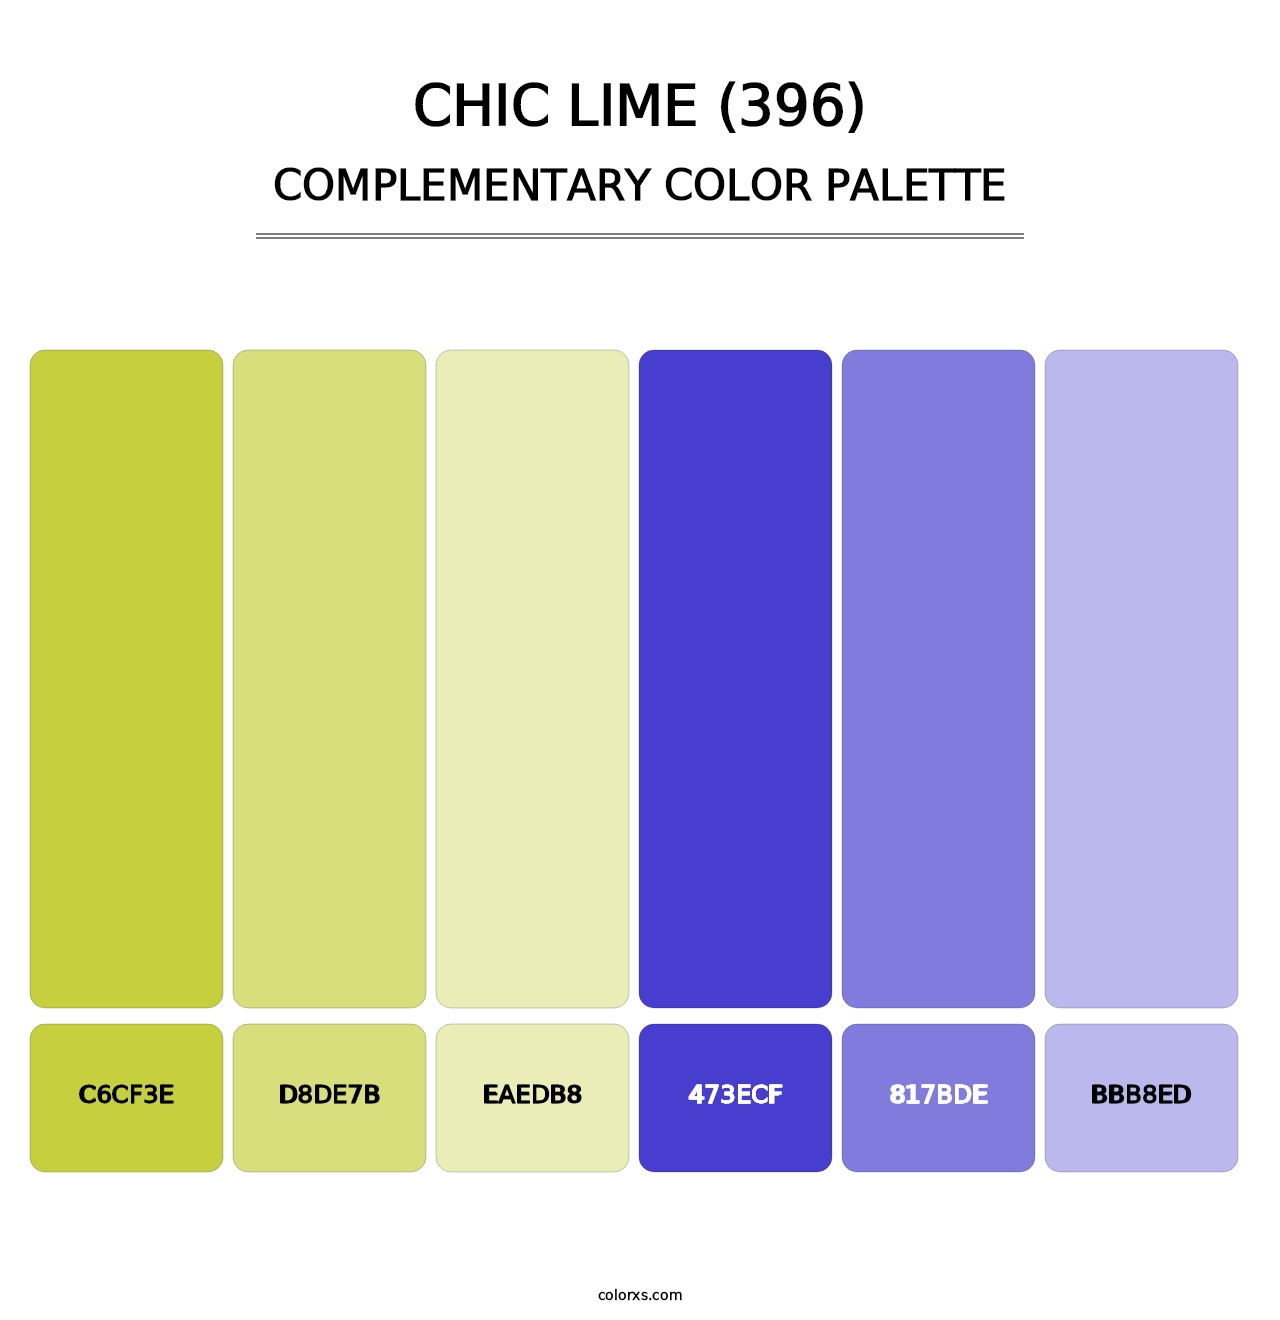 Chic Lime (396) - Complementary Color Palette